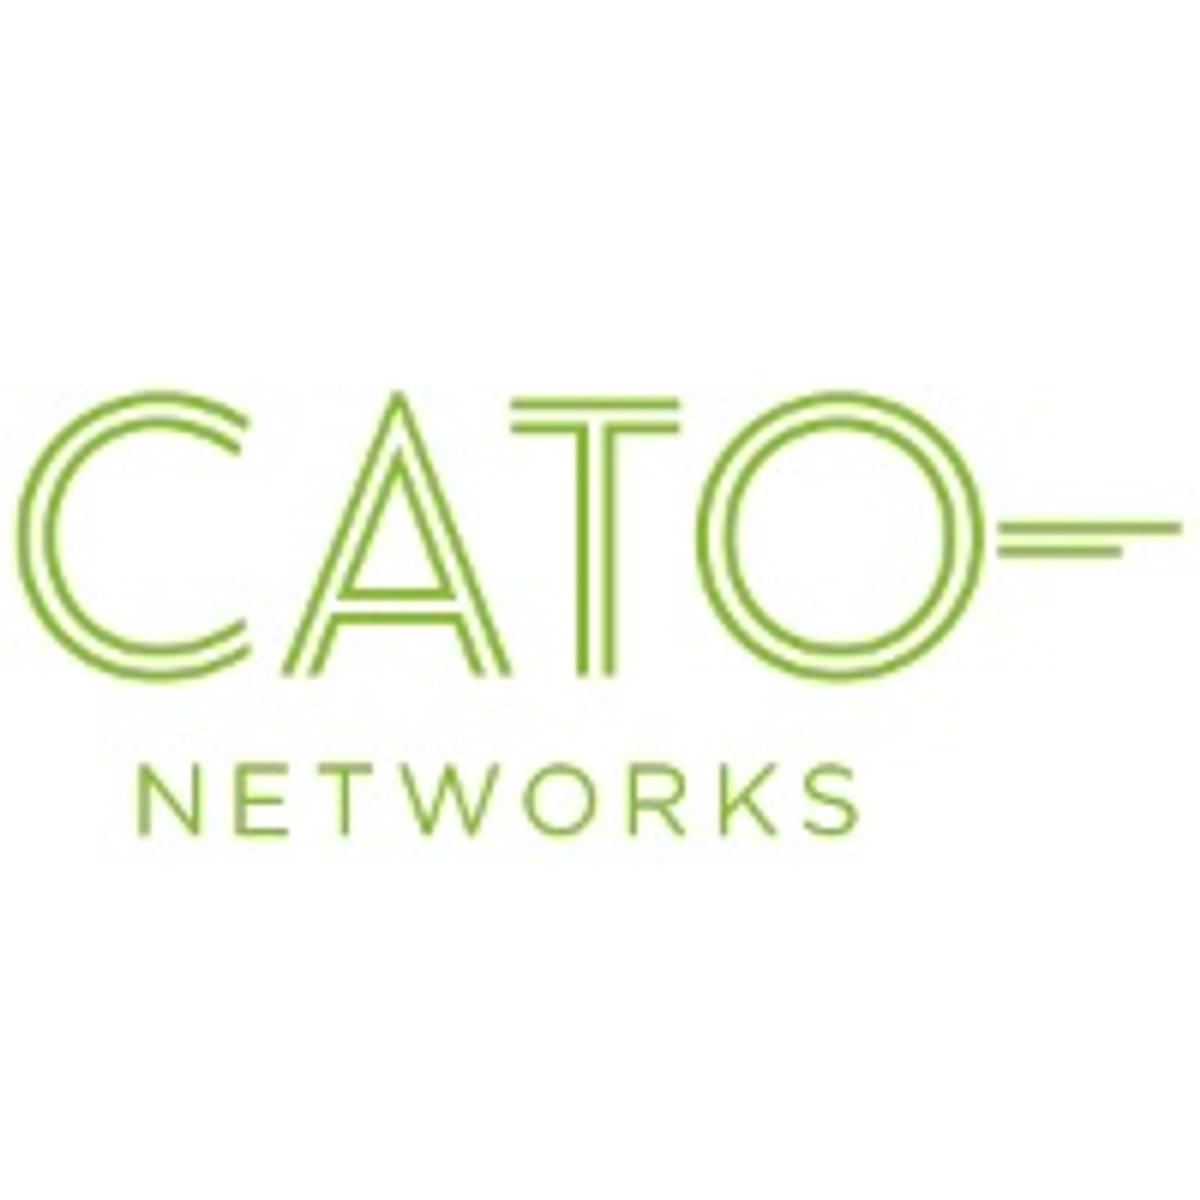 Exclusive Networks biedt Cato Networks Secure SD-WAN oplossing image